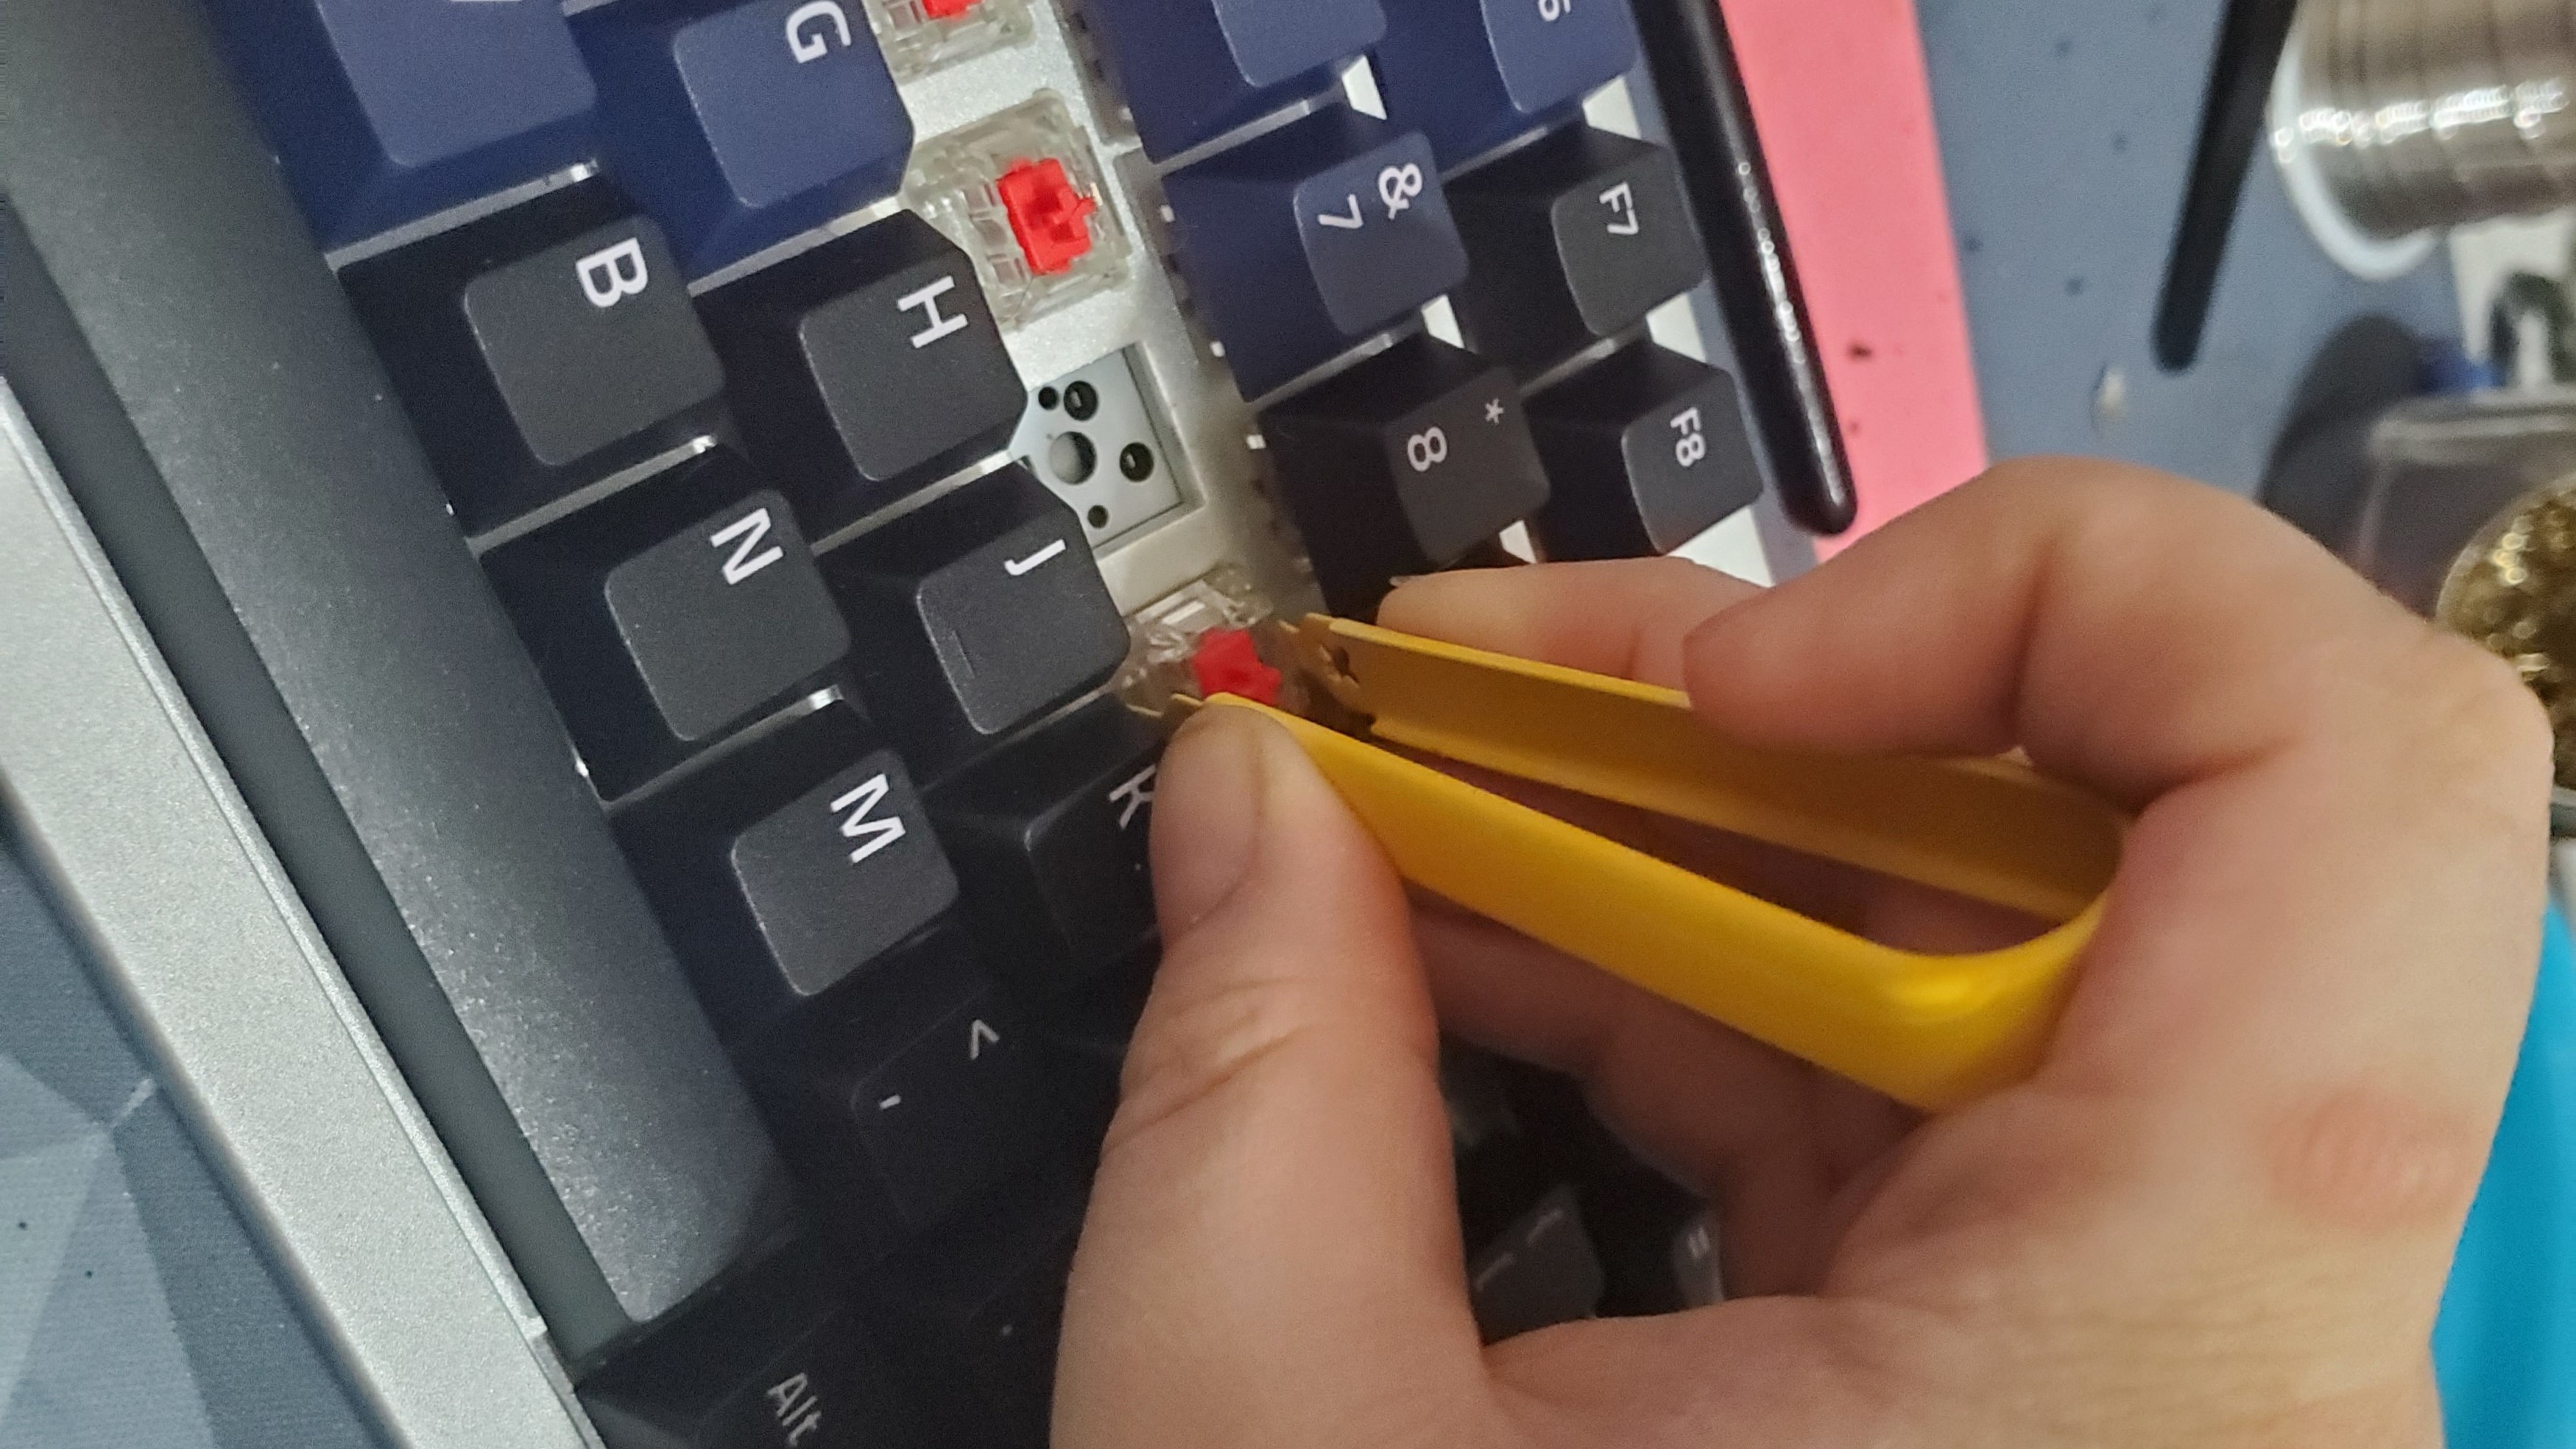 How to Lube Keyboard?